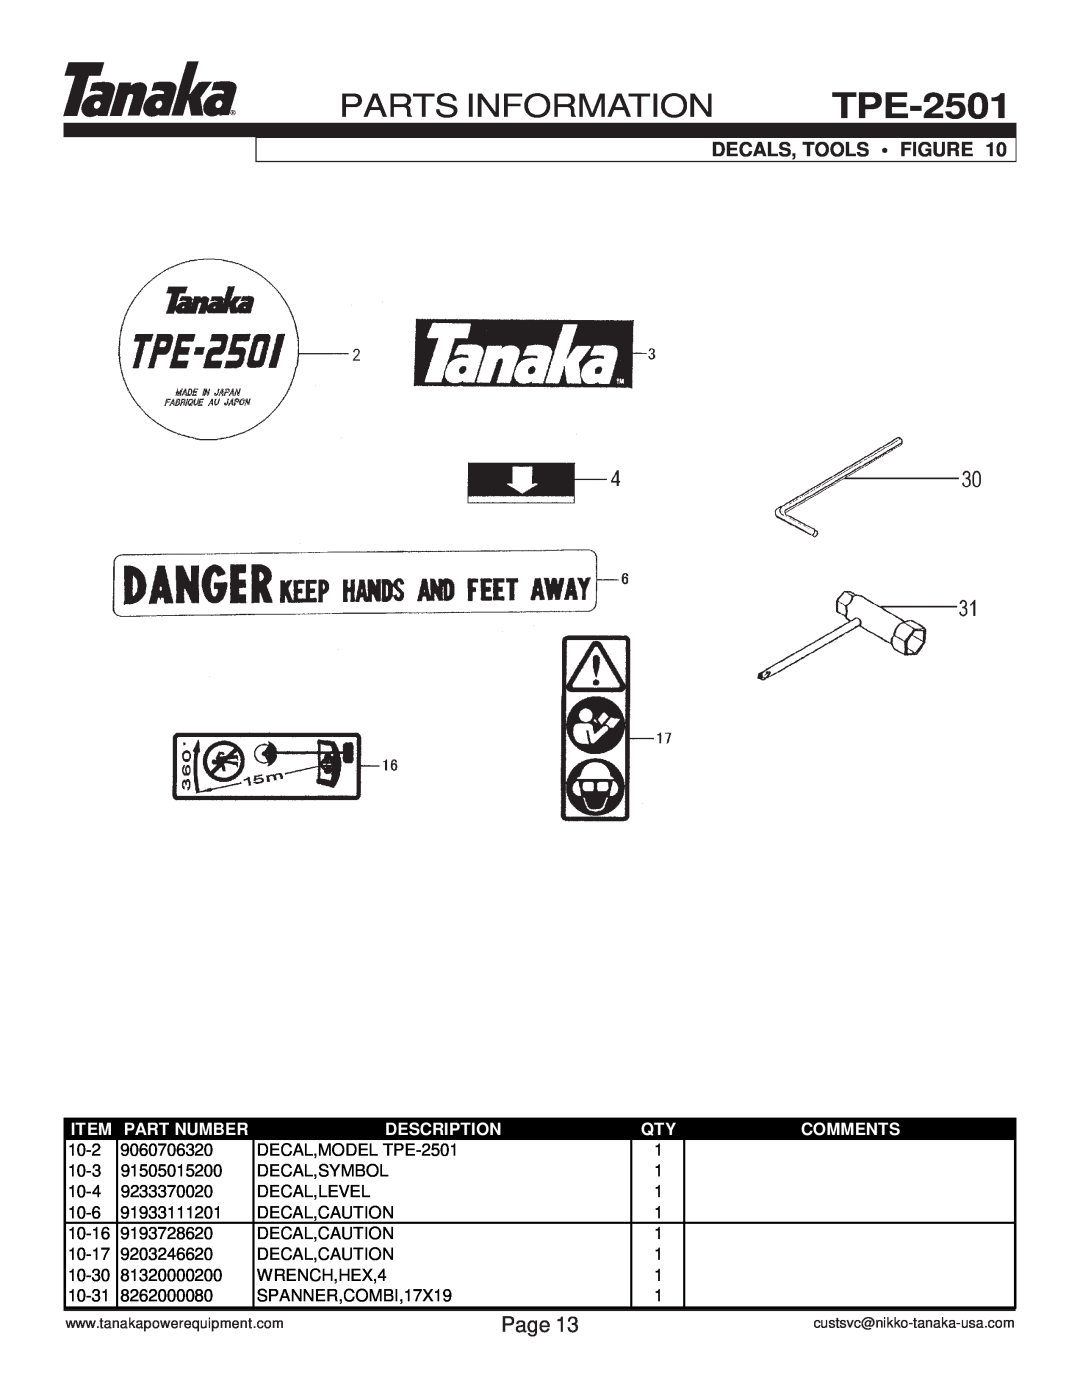 Tanaka TPE-2501 manual Parts Information, Decals, Tools Figure, Page, Part Number, Description, Comments 